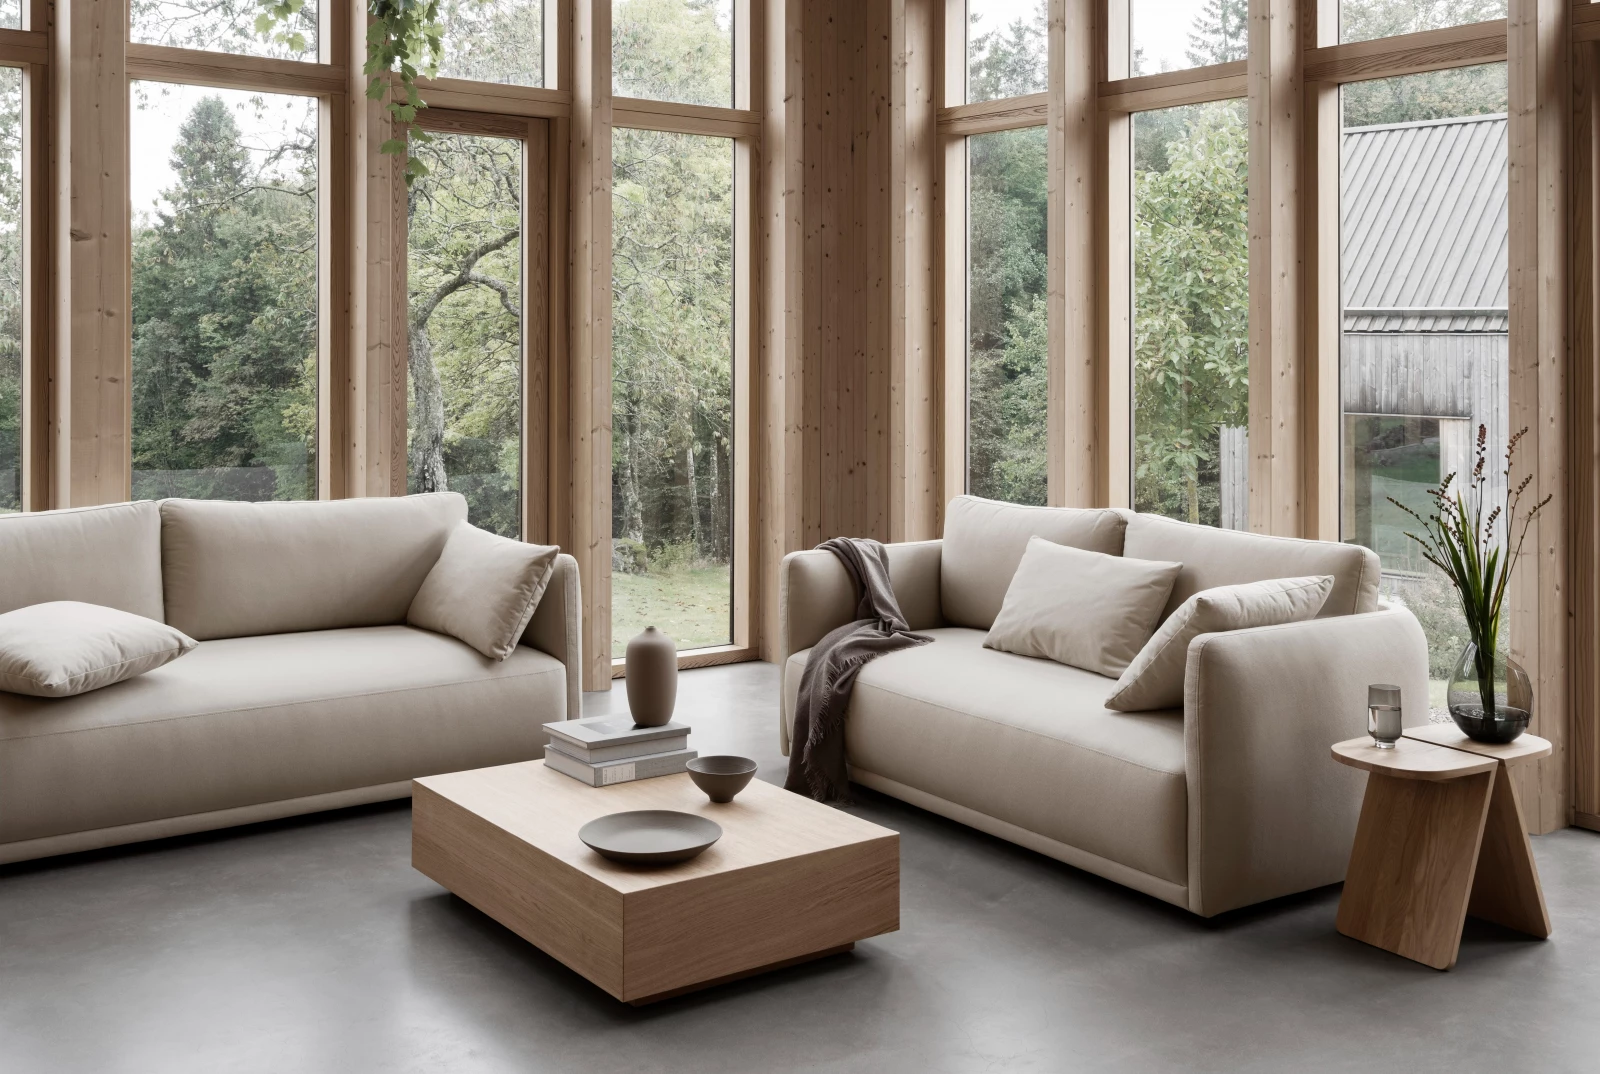 Indoor furniture made by blomus